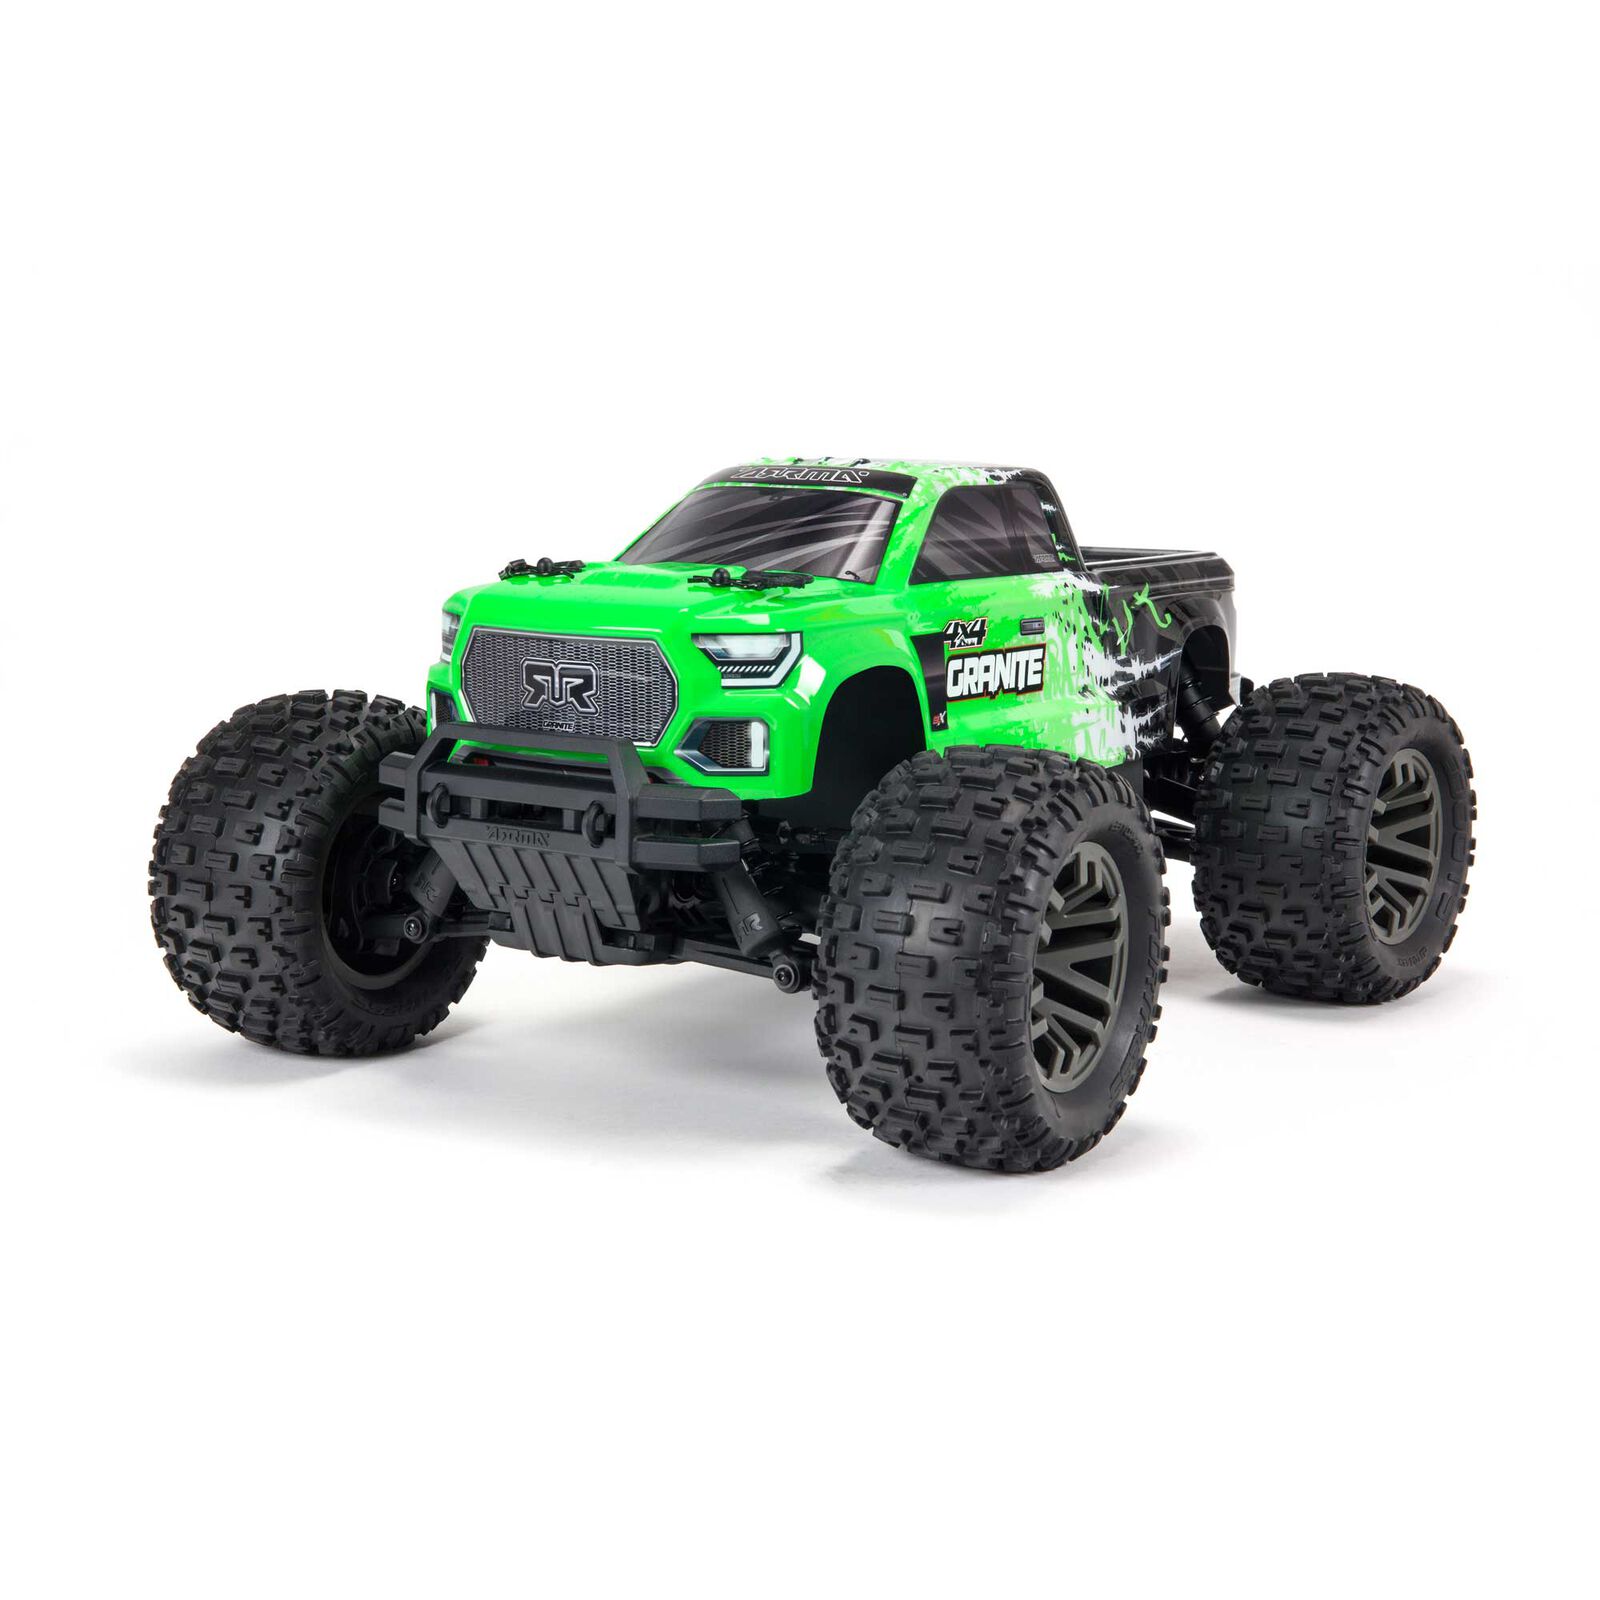 ARRMA 1/10 Granite 4X4 V3 3S BLX Brushless Monster RC Truck RTR  (Transmitter and Receiver Included, Batteries and Charger Required), Green